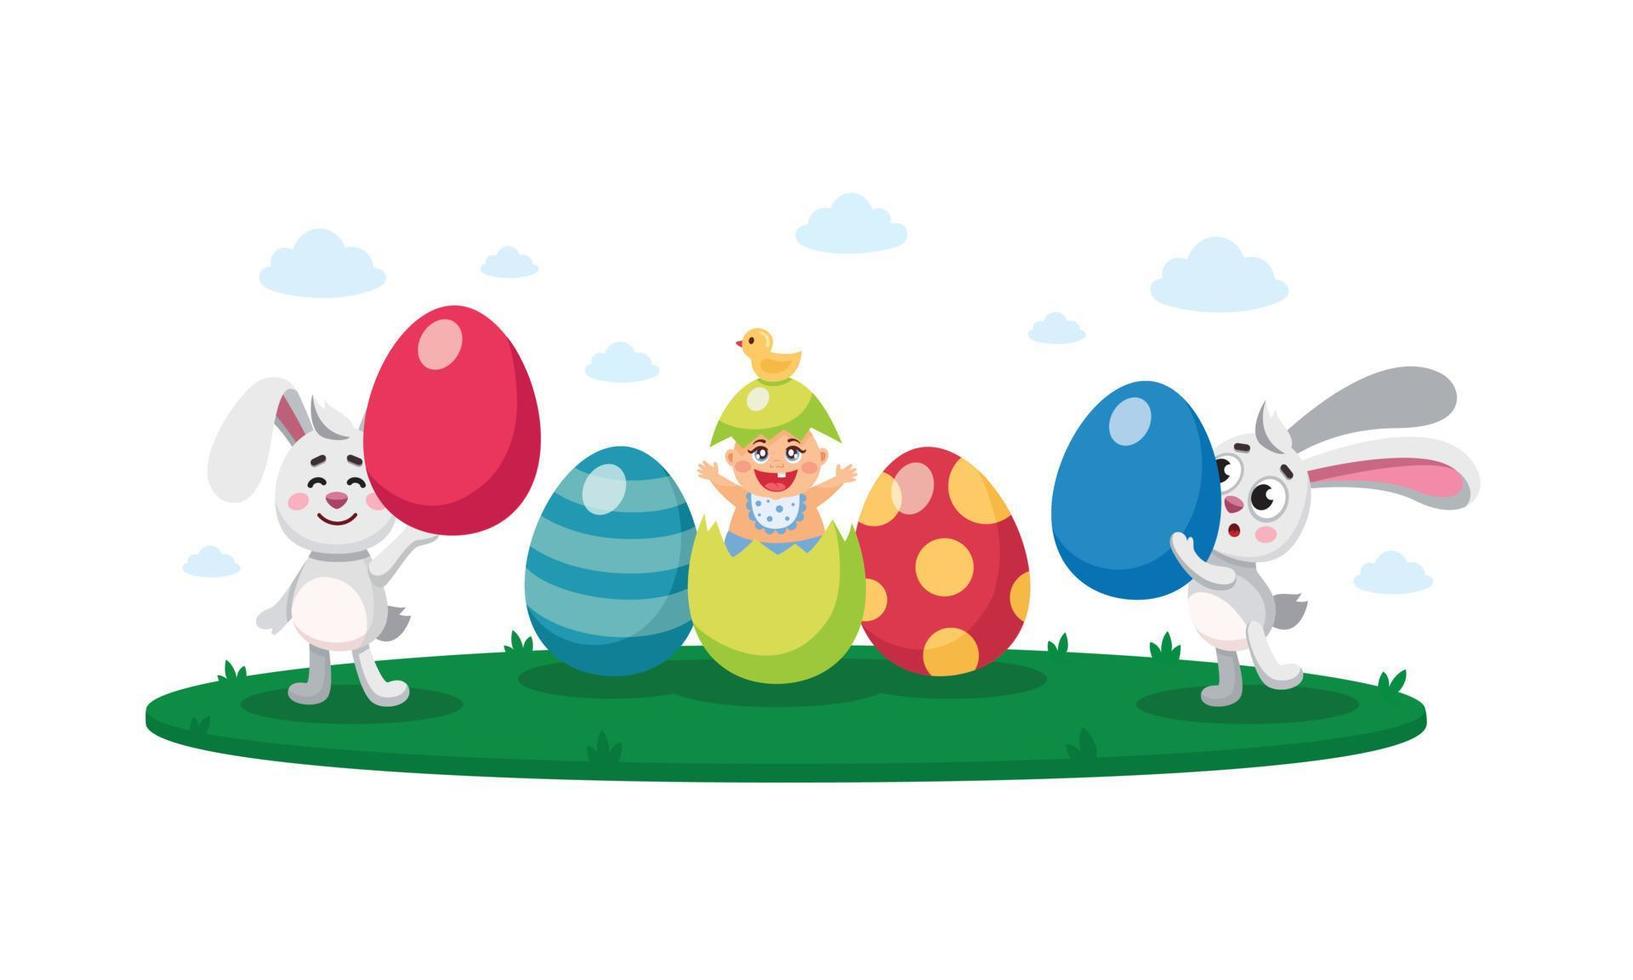 Happy easter, egg hunt flat kid's vector illustration, composition, banner, card, poster with painted, decorative eggs, newborn baby, easter rabbits, bunnies, hares, seasonal greeting